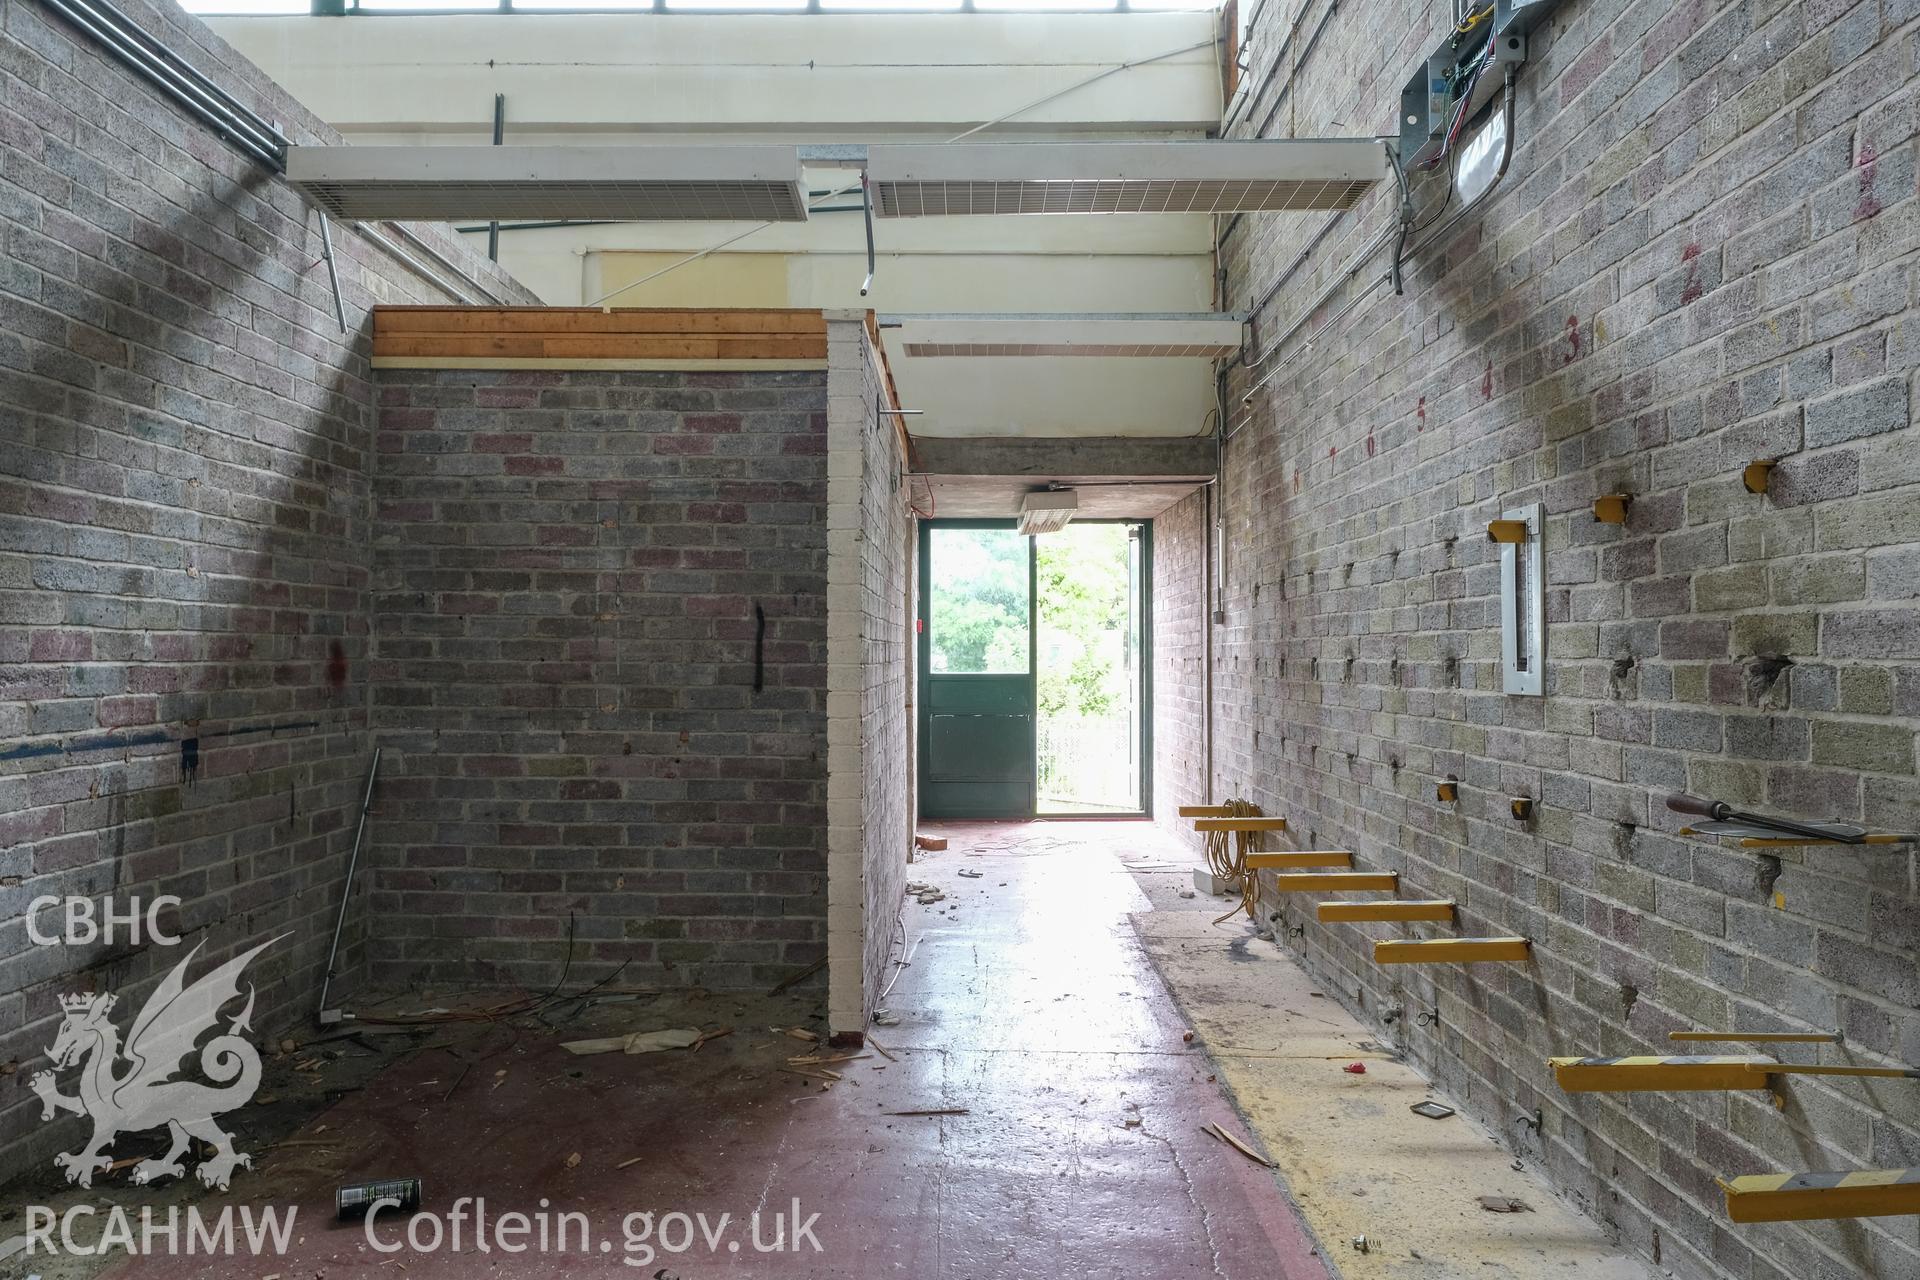 Digital colour photograph showing interior view of corridor and entrance at Caernarfonshire Technical College, Ffriddoedd Road, Bangor. Photographed by Dilys Morgan and donated by Wyn Thomas of Grwp Llandrillo-Menai Further Education College, 2019.